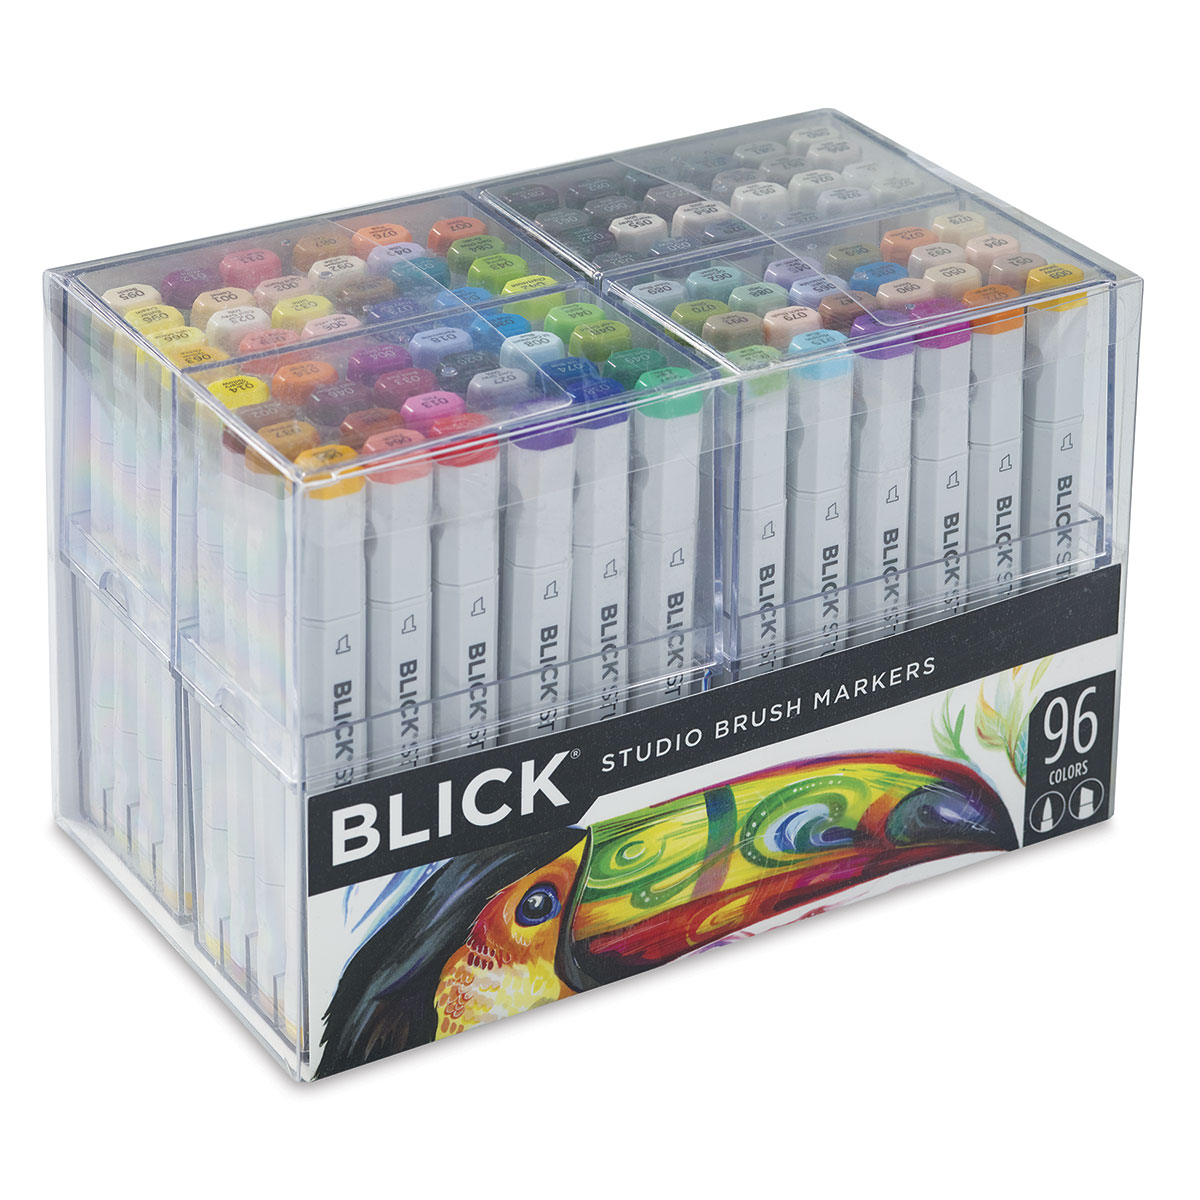 Swatch Form: Blick Studio Brush Markers 144pc. 